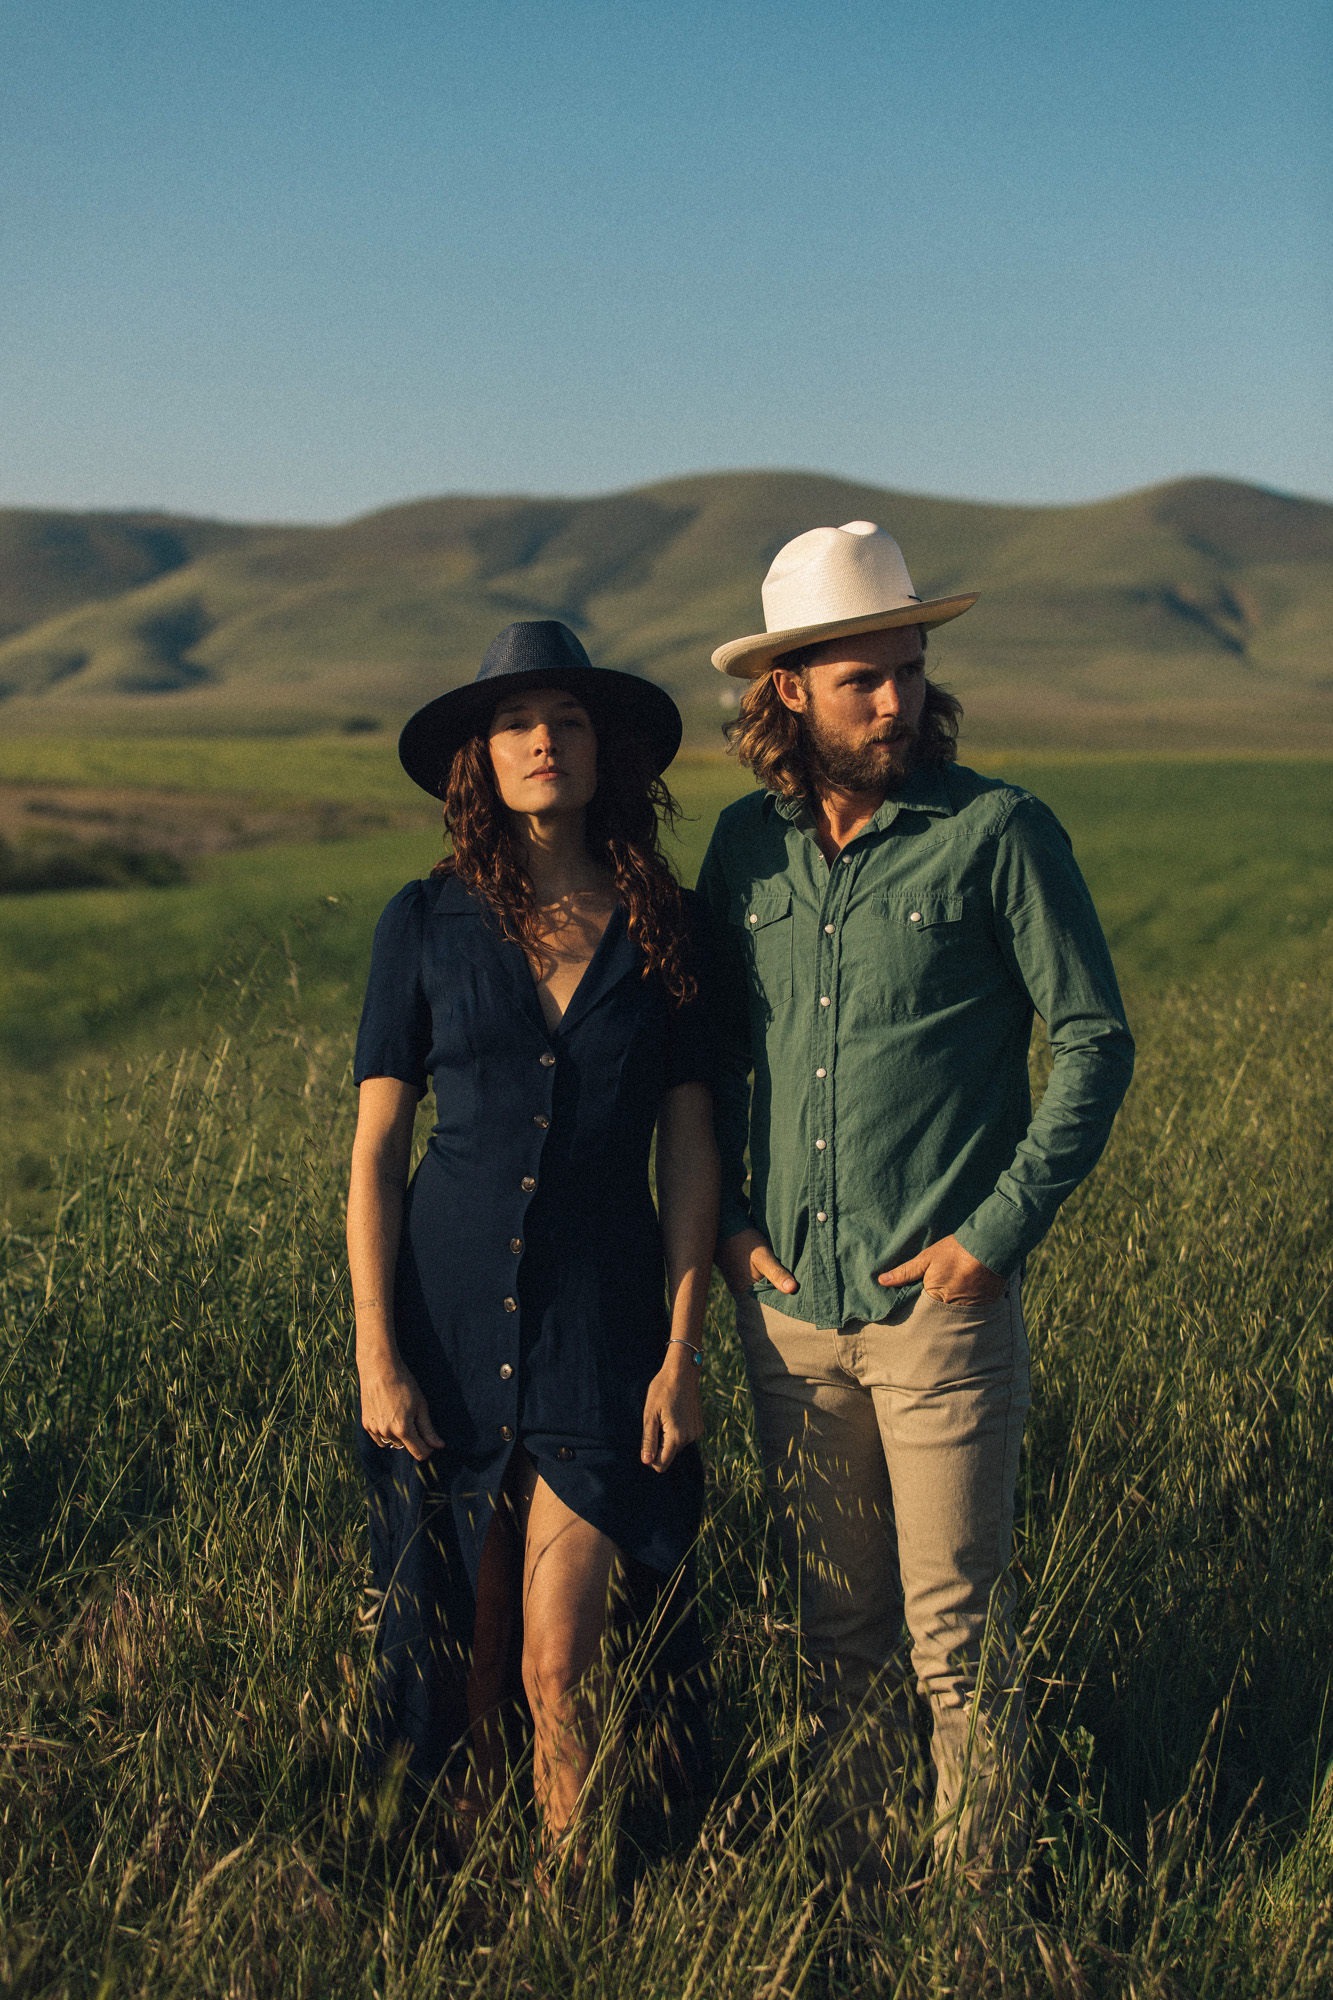 Commercial Lifestyle Photography for Stetson by Jenavieve Belair | Modern western imagery with warmth, sunlight, and authenticity captured in San Luis Obsipo, CA.